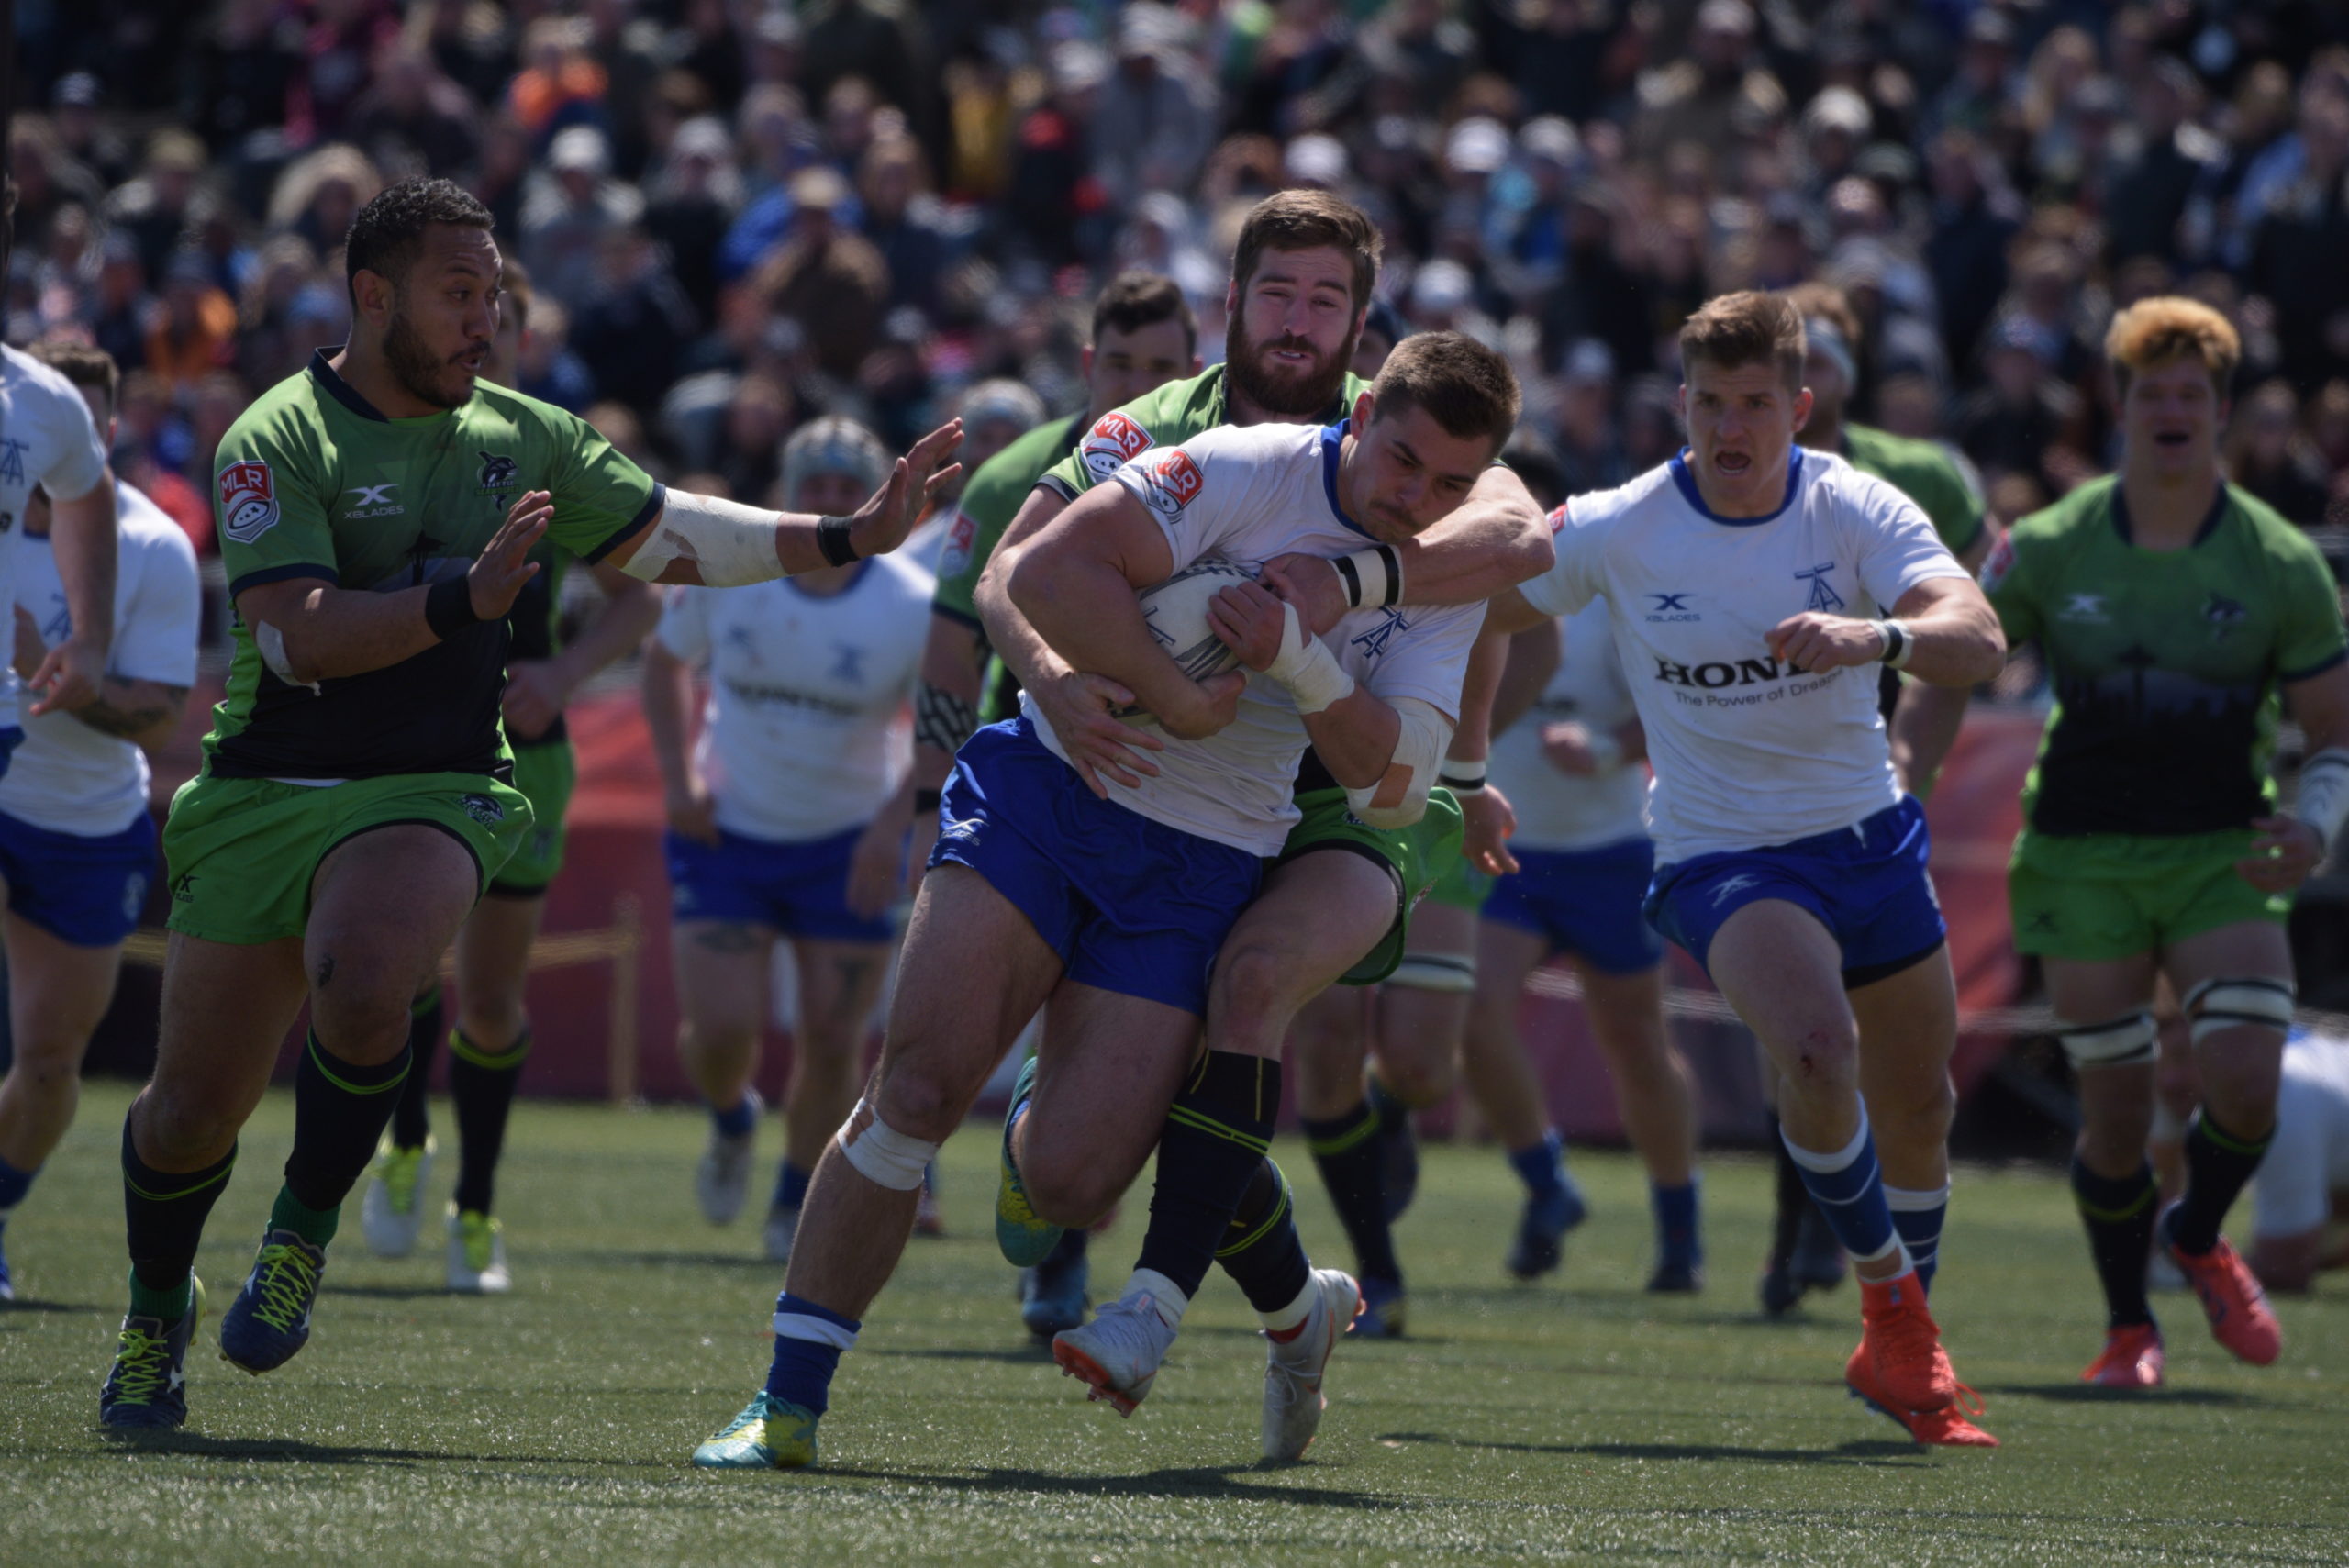 Arrows Use Stalwart Defensive Performance to Defeat Reigning MLR Champions